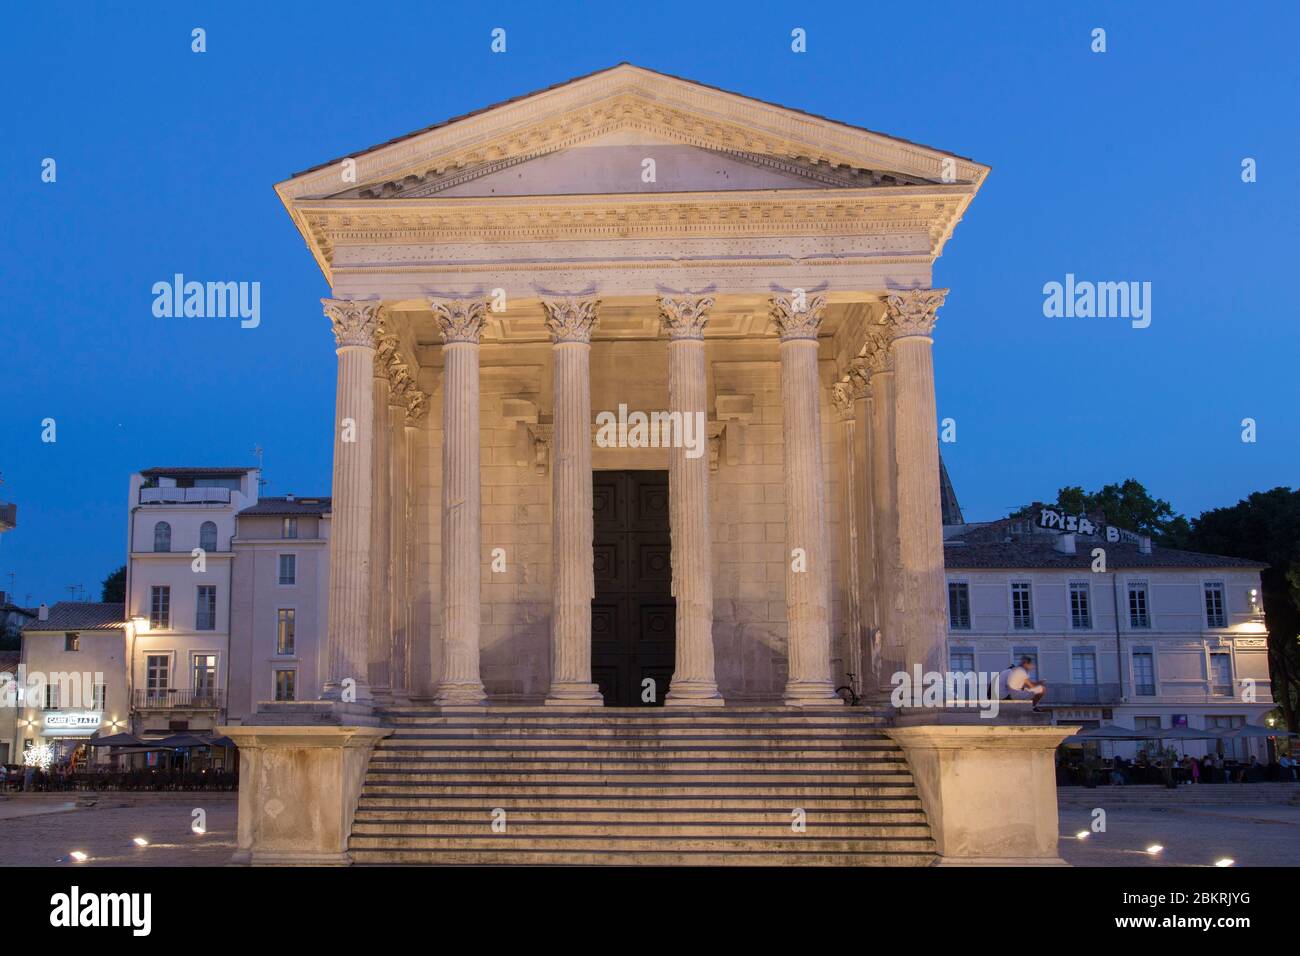 France, Gard, Nimes, Maison Carre, Roman temple hexastyle of the first century, night view Stock Photo